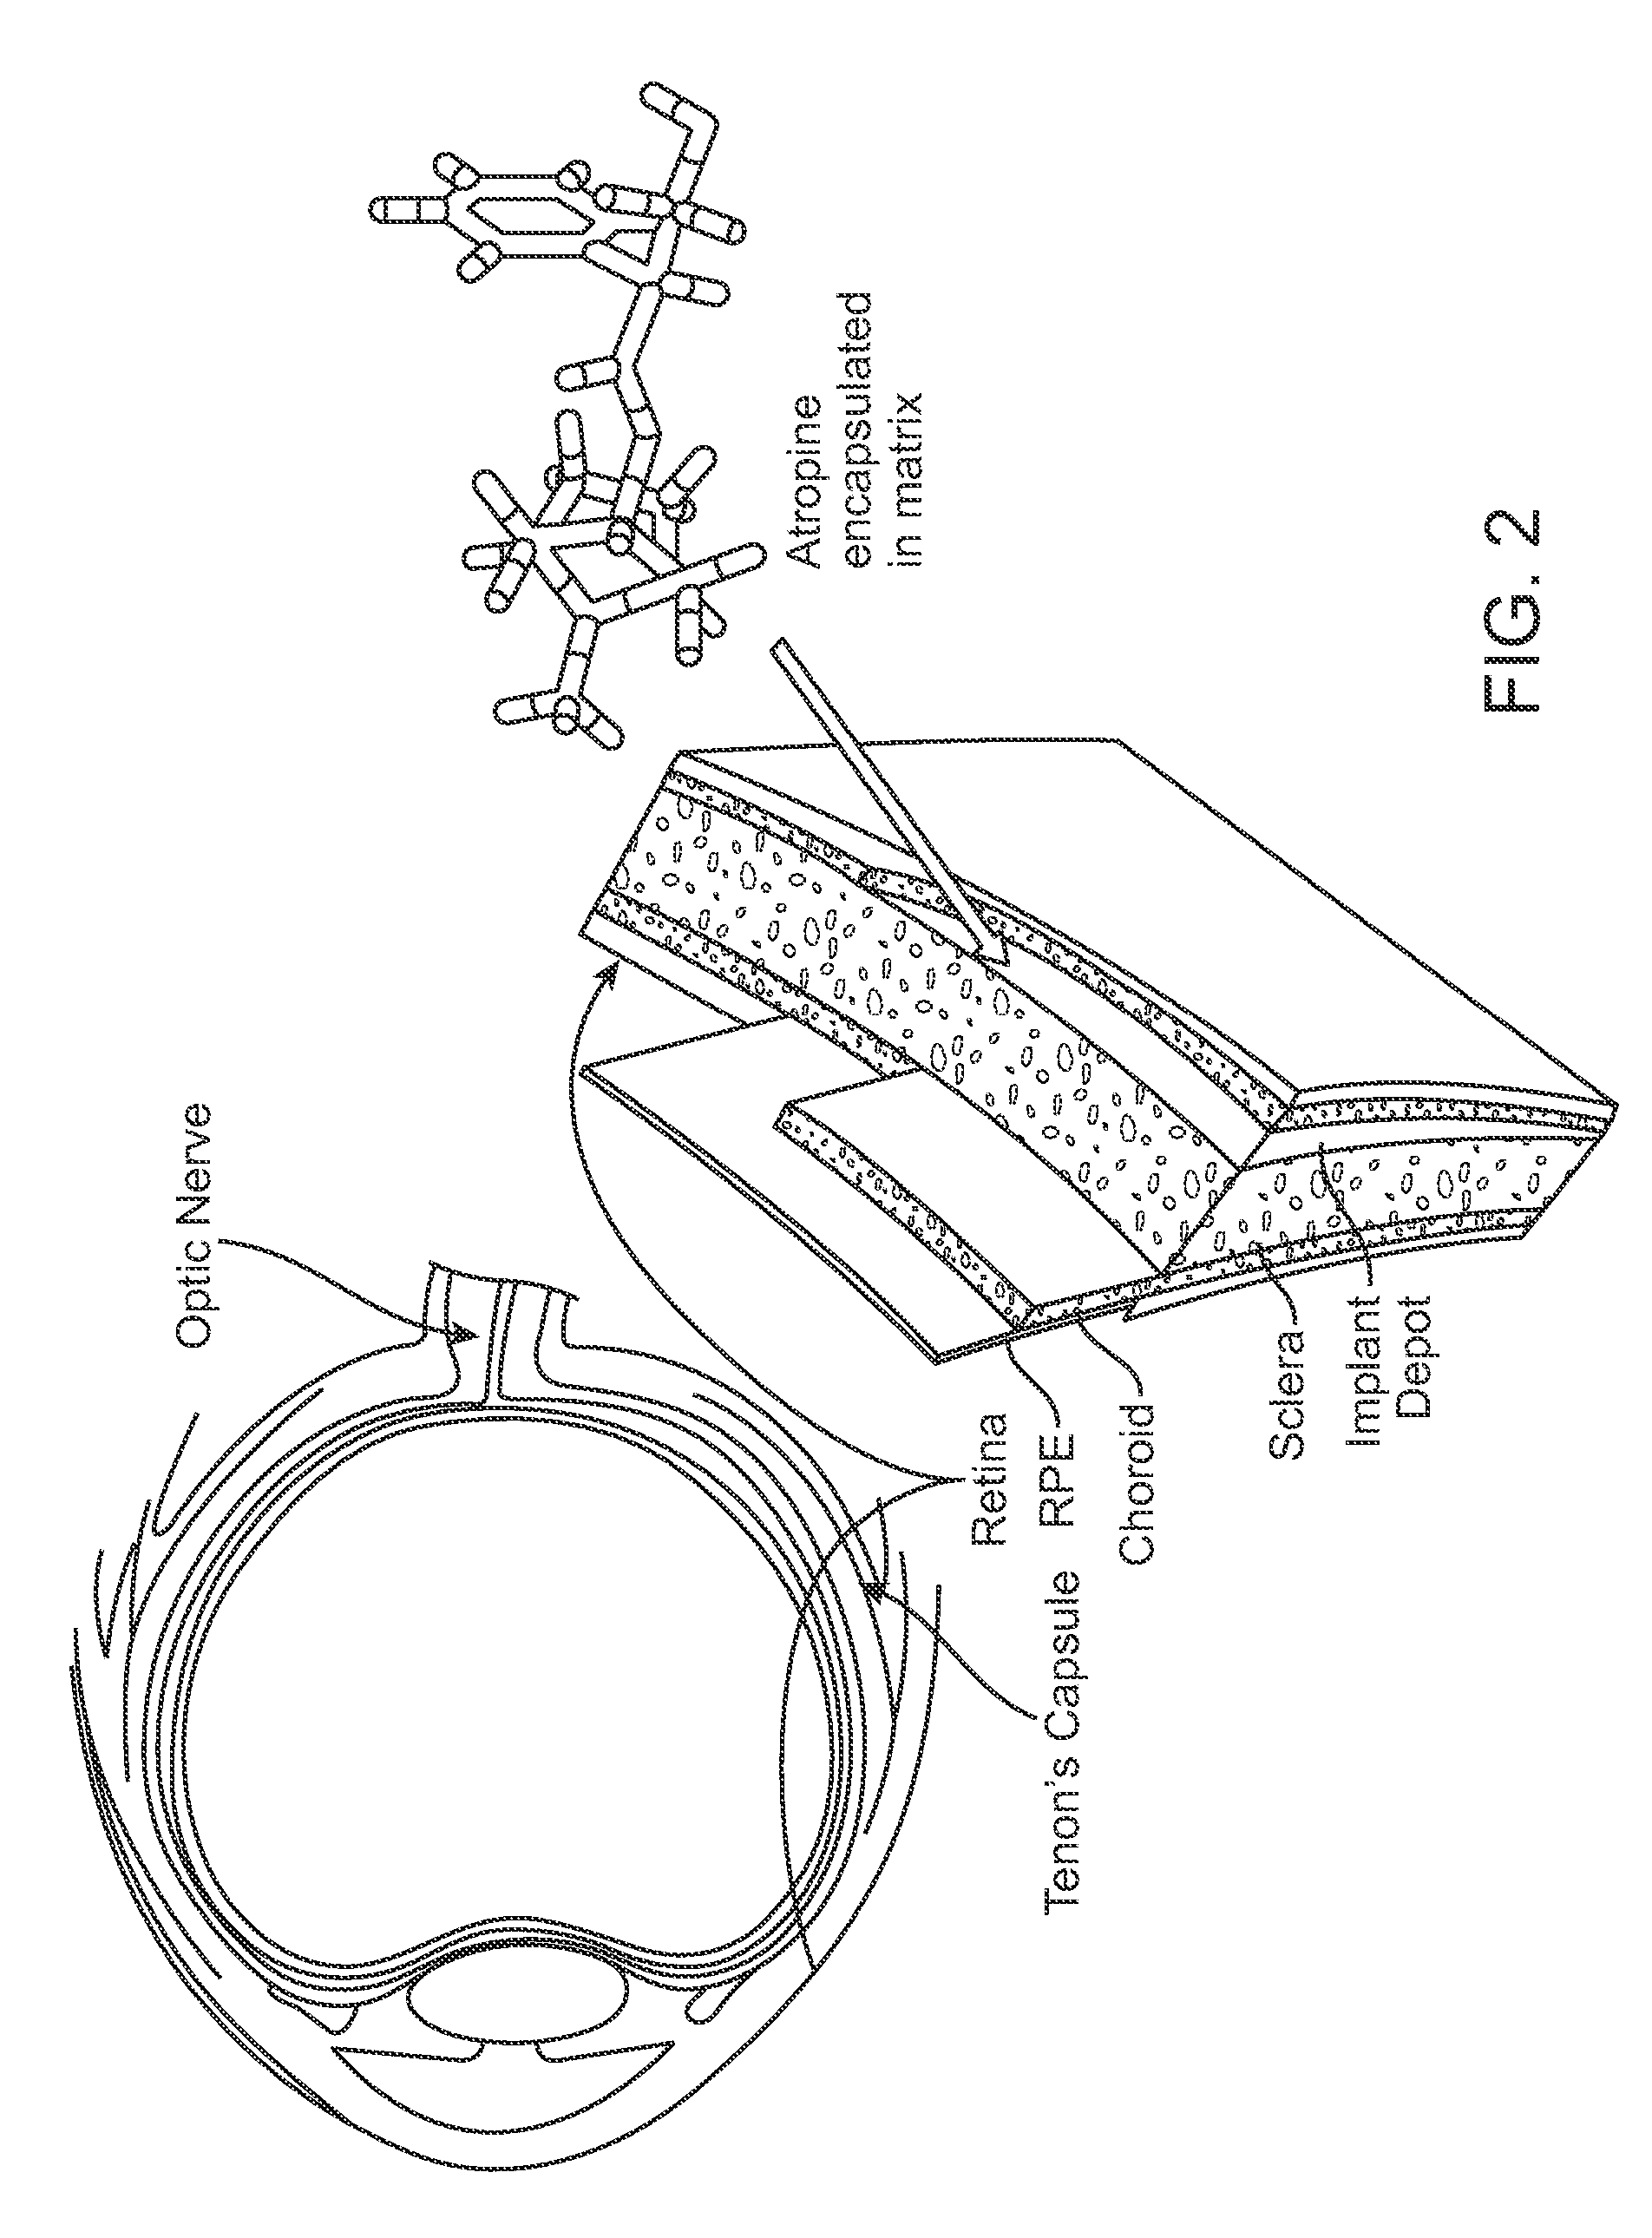 Implantable Delivery Vehicle for Ocular Delivery of Muscarinic Antagonists